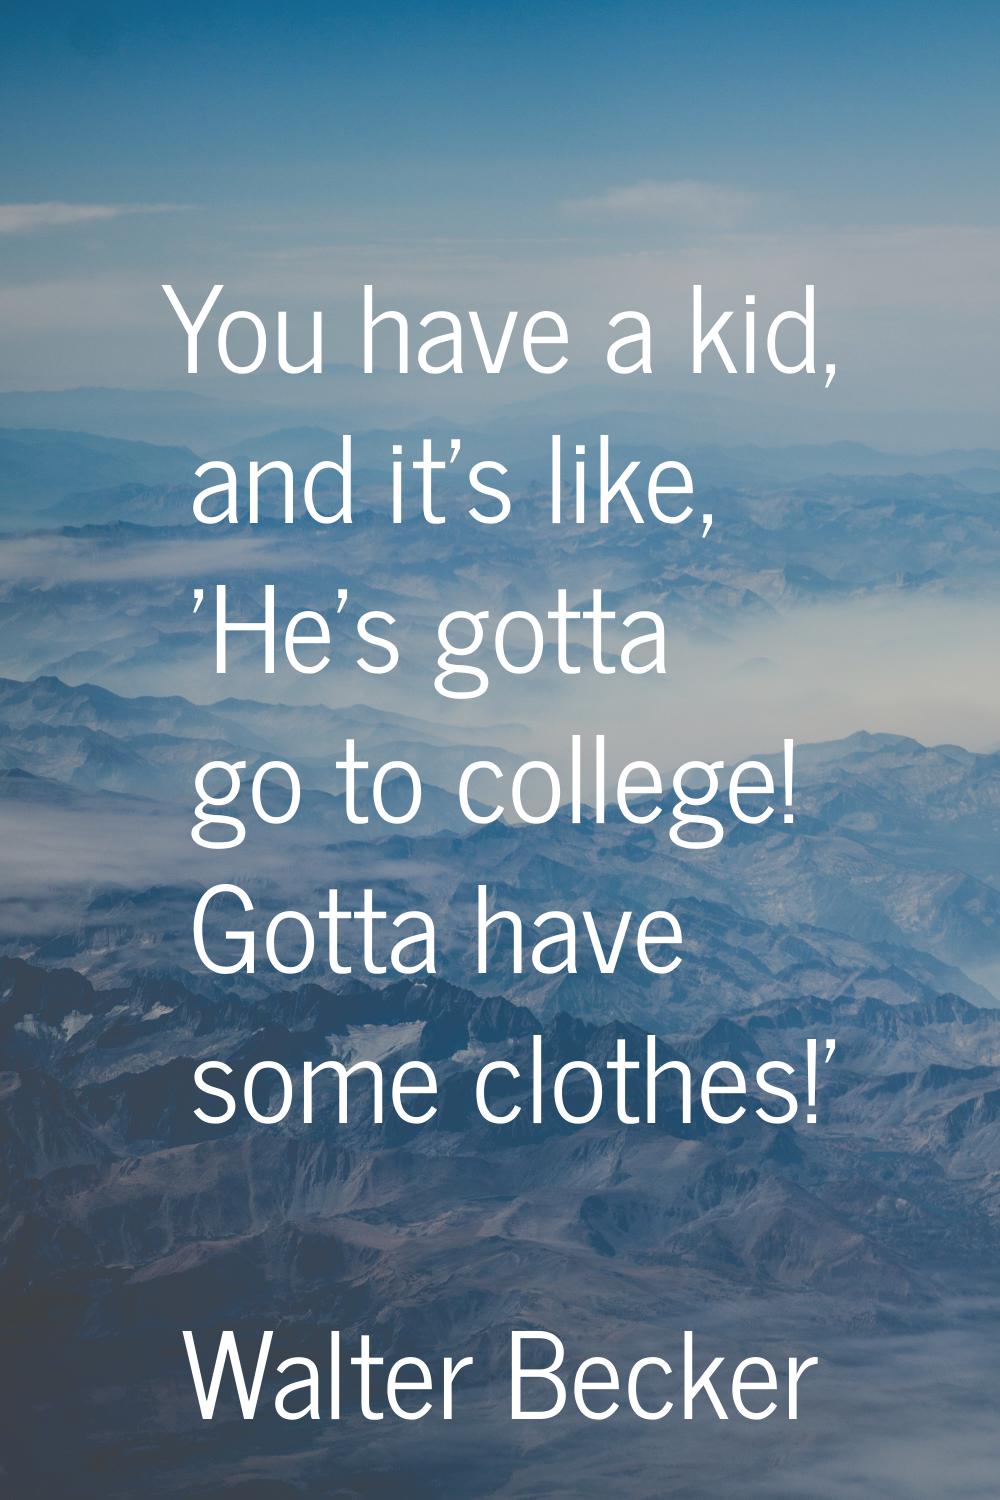 You have a kid, and it's like, 'He's gotta go to college! Gotta have some clothes!'